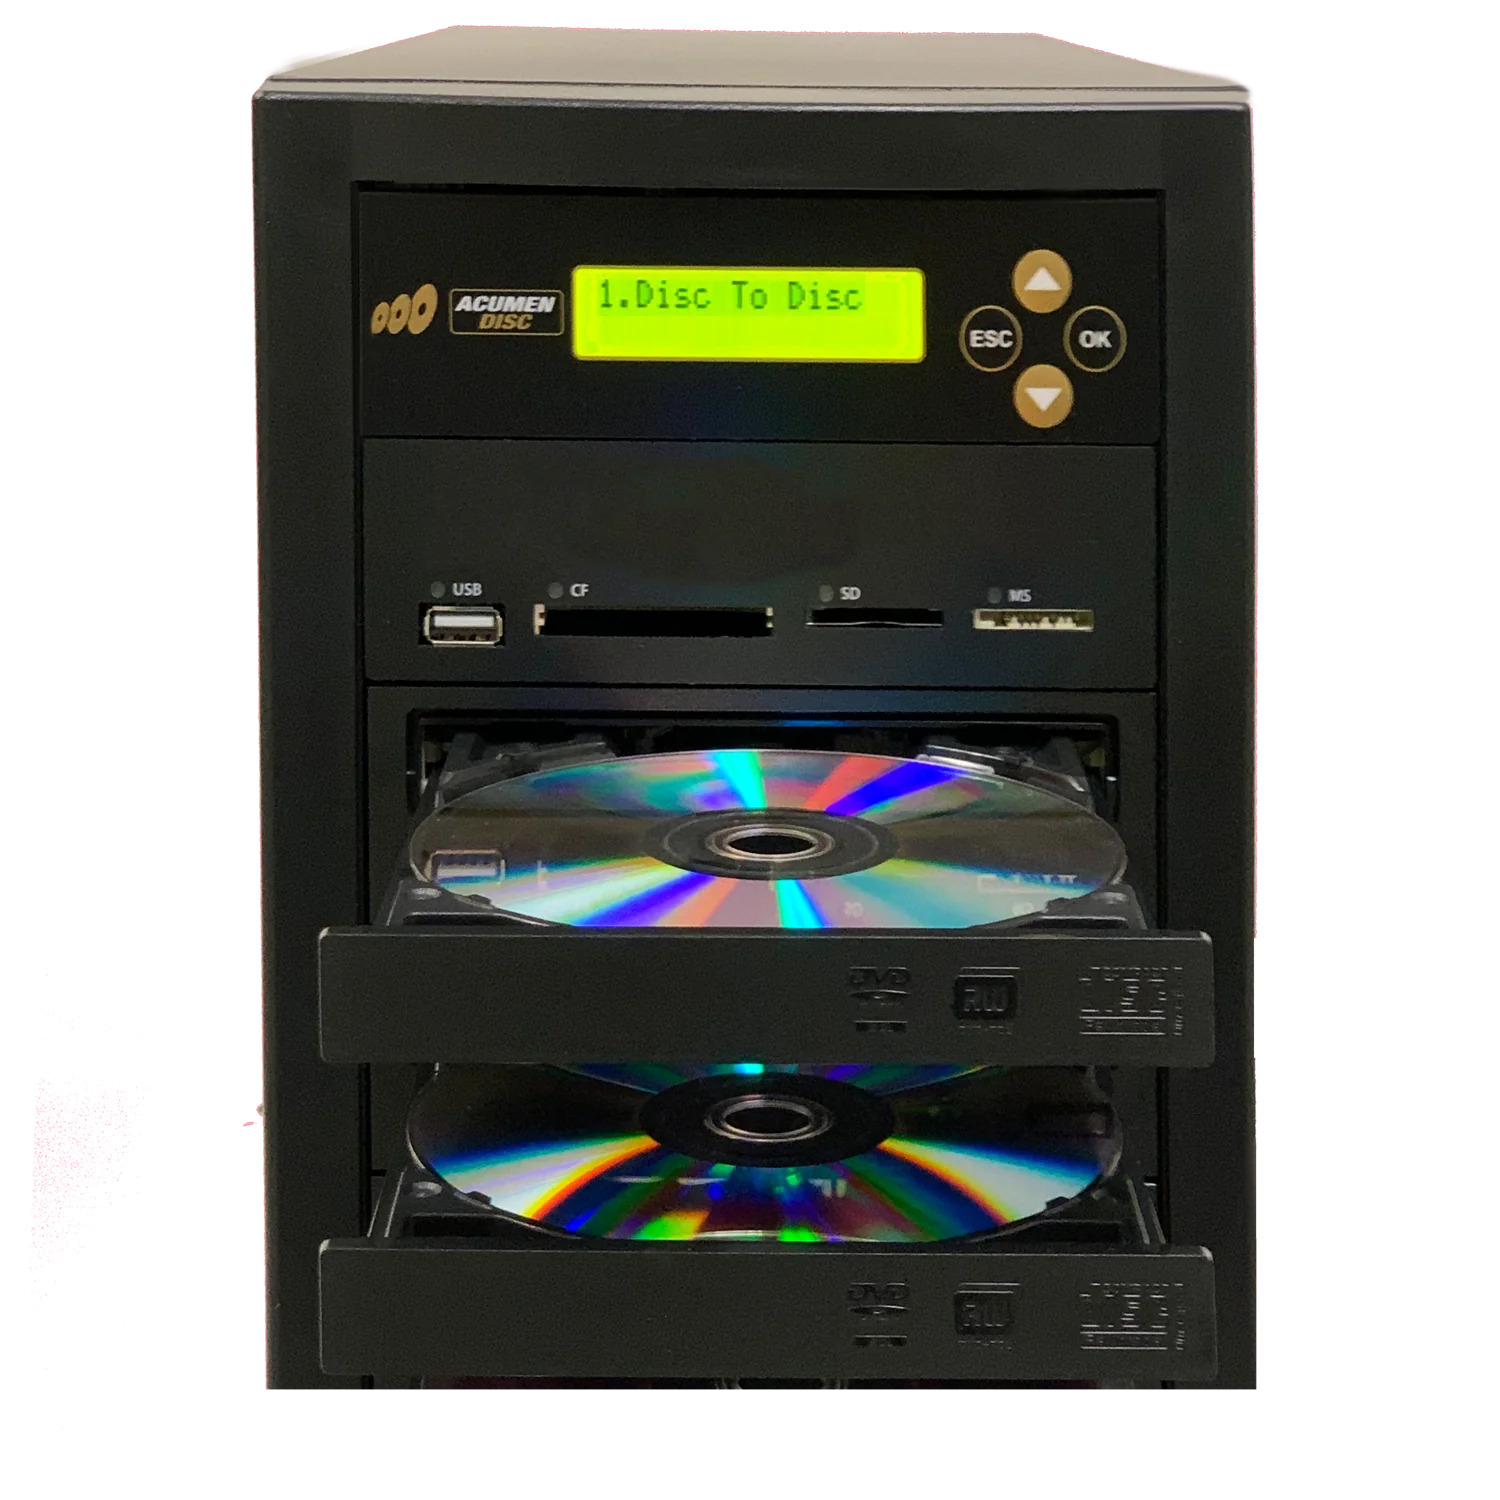 Acumen Disc 1 to 1 DVD Multimedia Backup Duplicator - Flash Media (CF / SD / USB / MMS) to Discs (DVD/CD) Copier Tower System - image 3 of 8